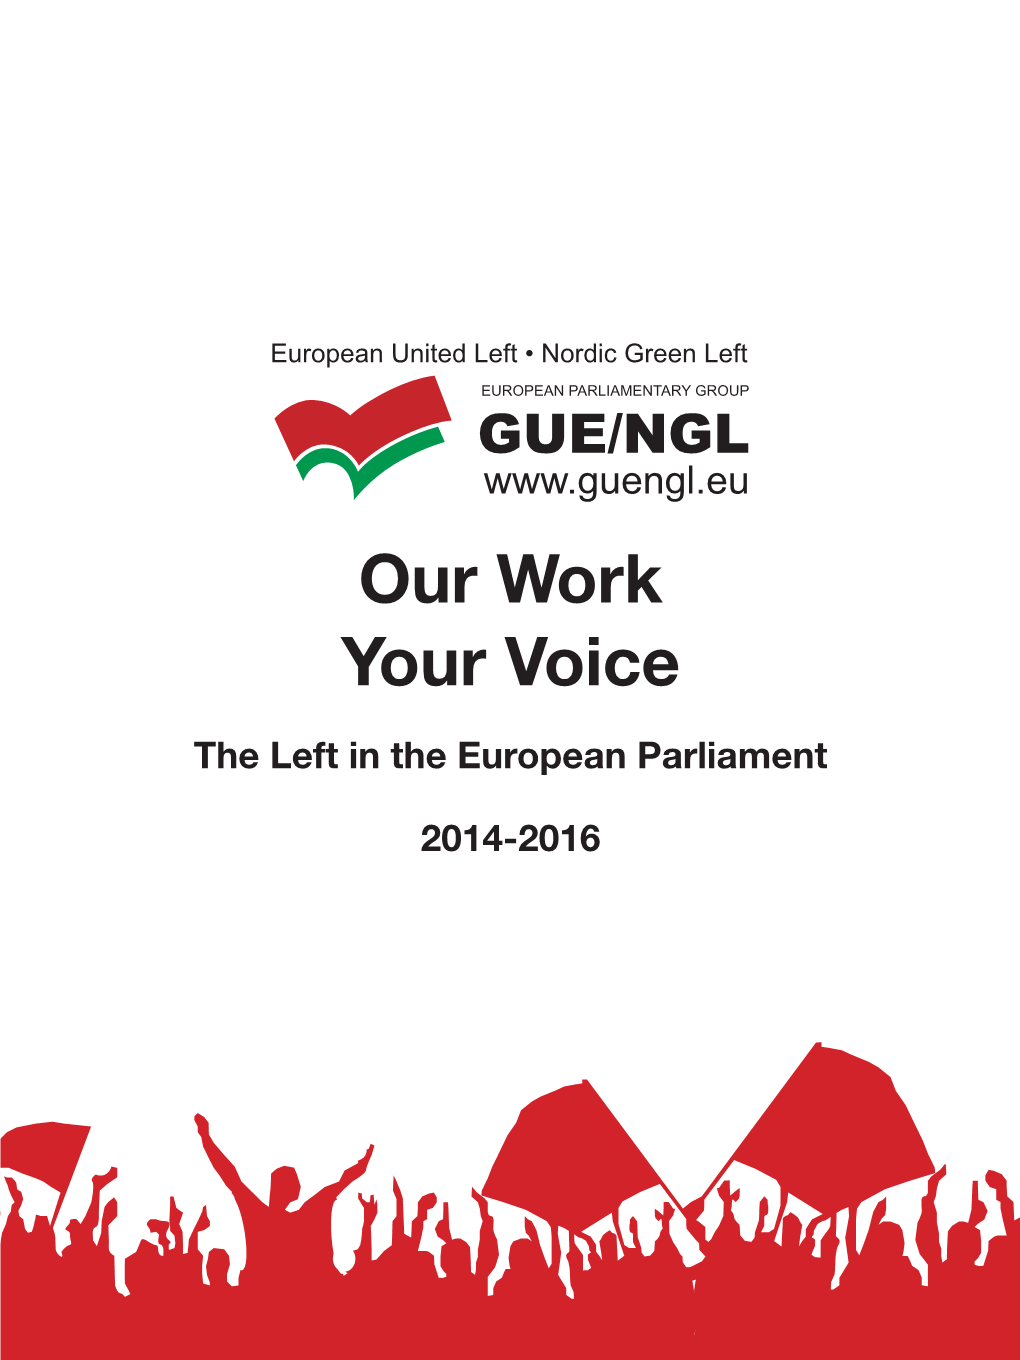 Our Work Your Voice the Left in the European Parliament